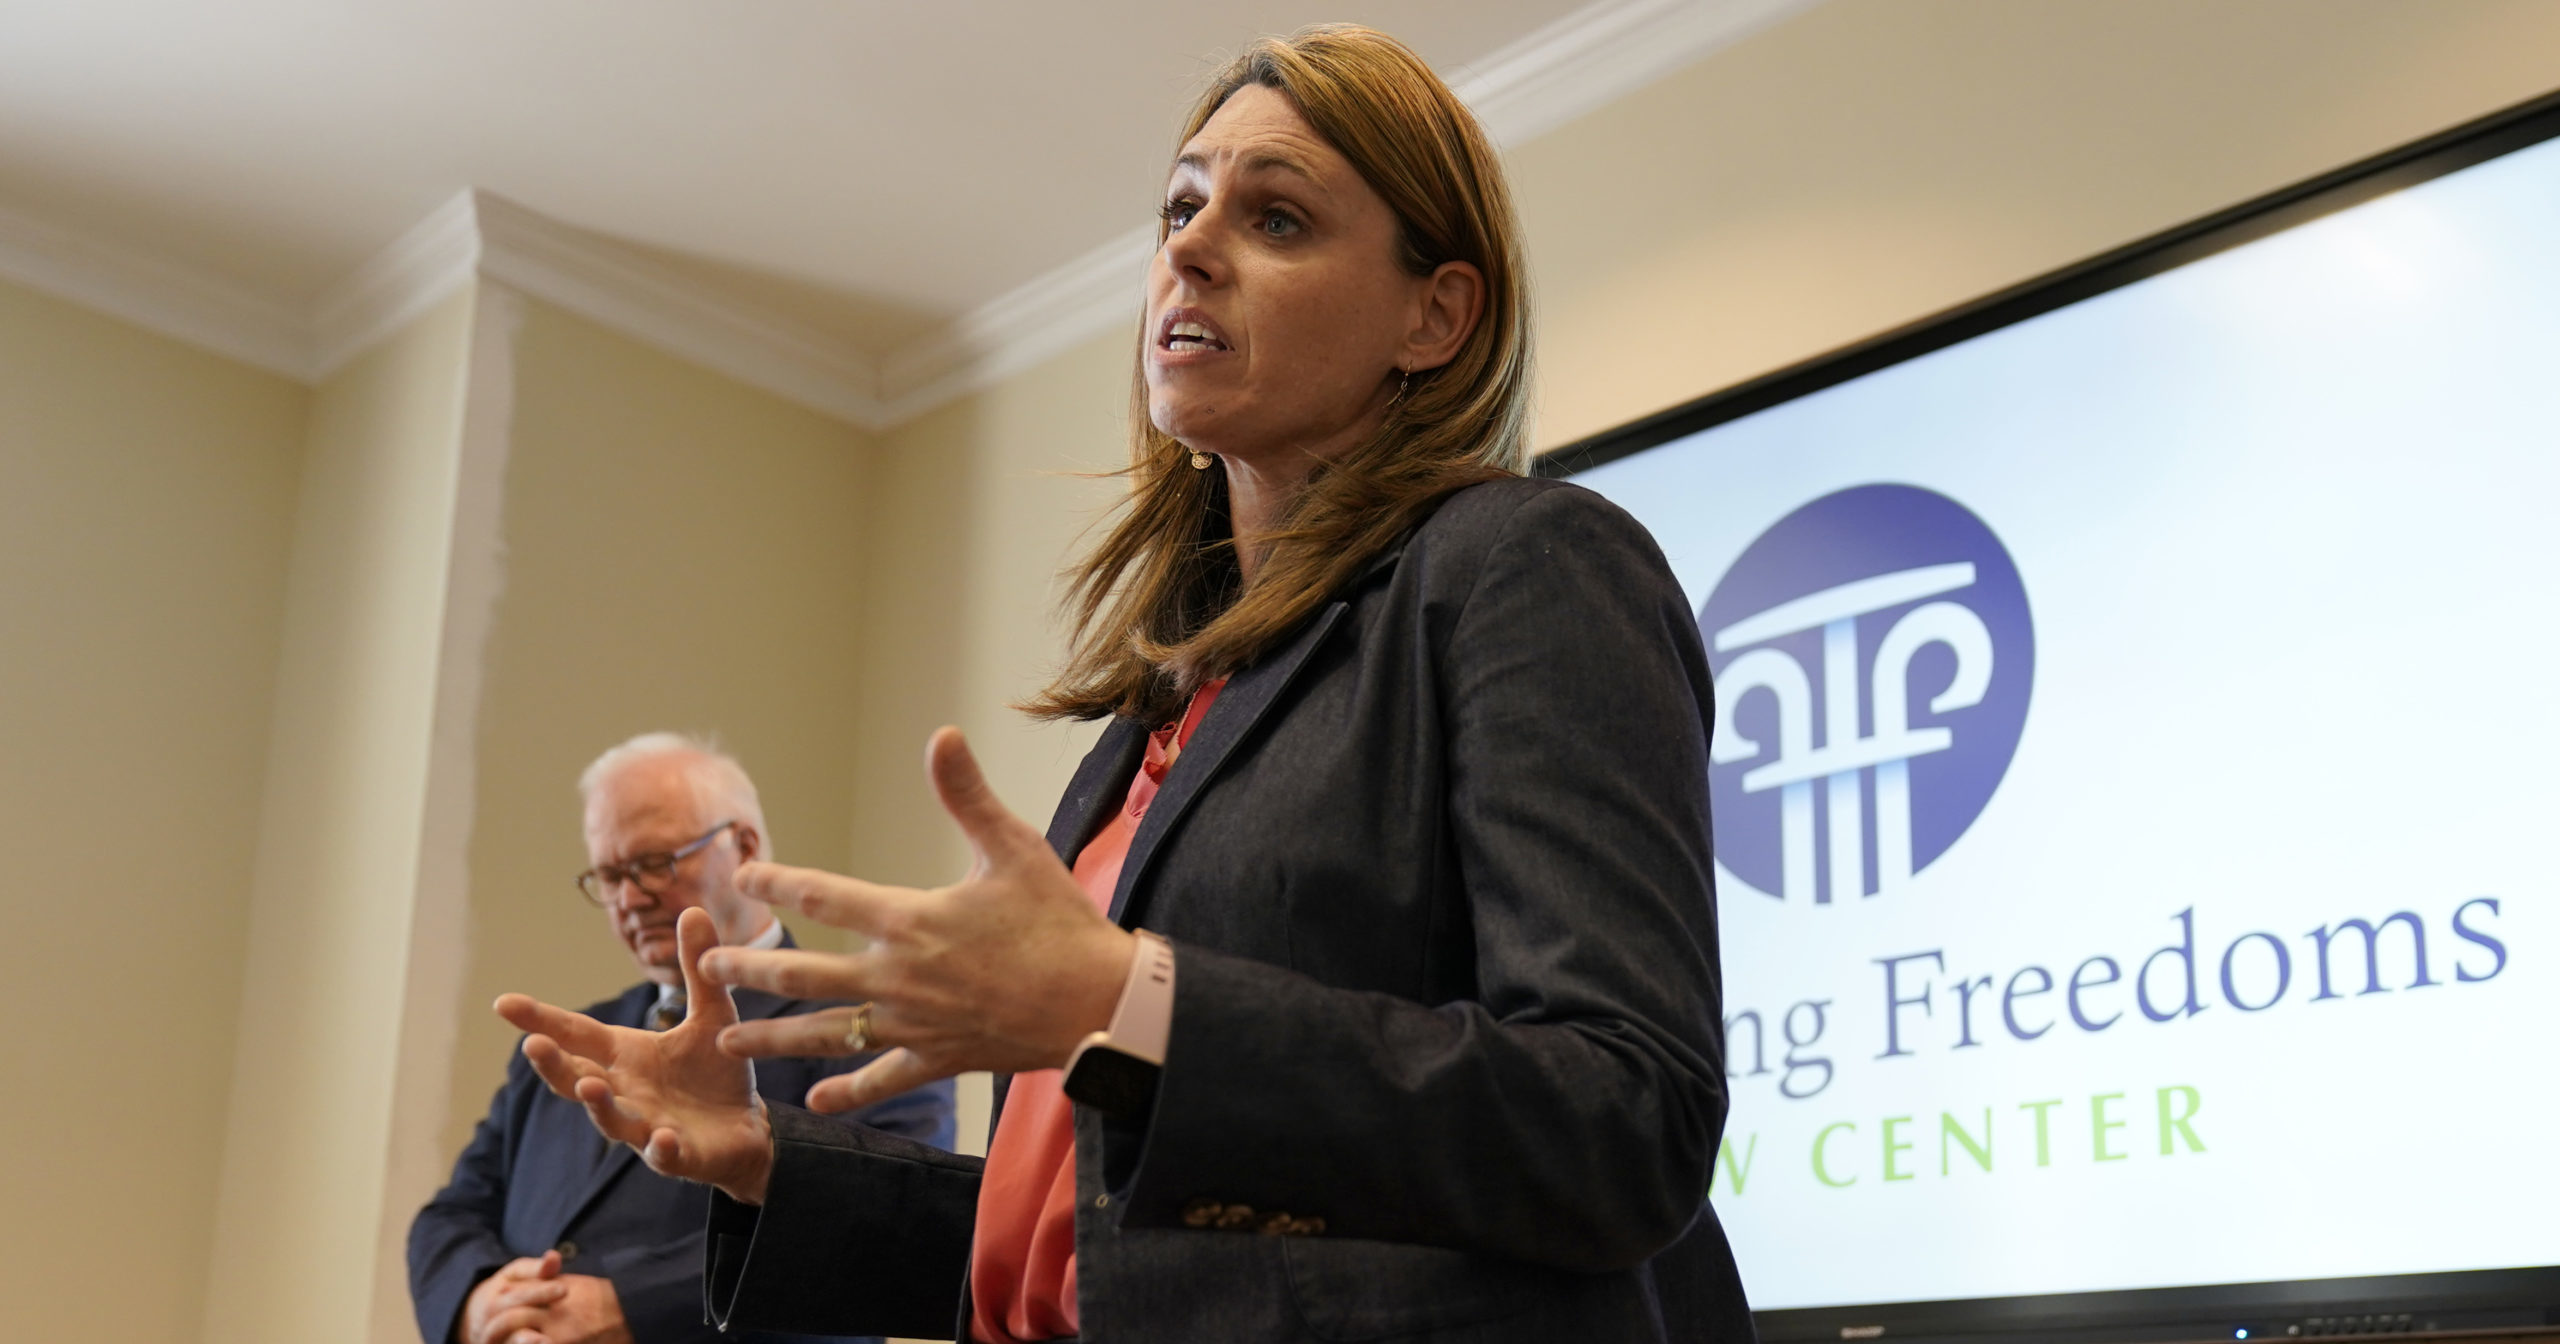 Victoria Cobb of The Family Foundation speaks during a news conference in Richmond, Virginia, on March 30, 2021.